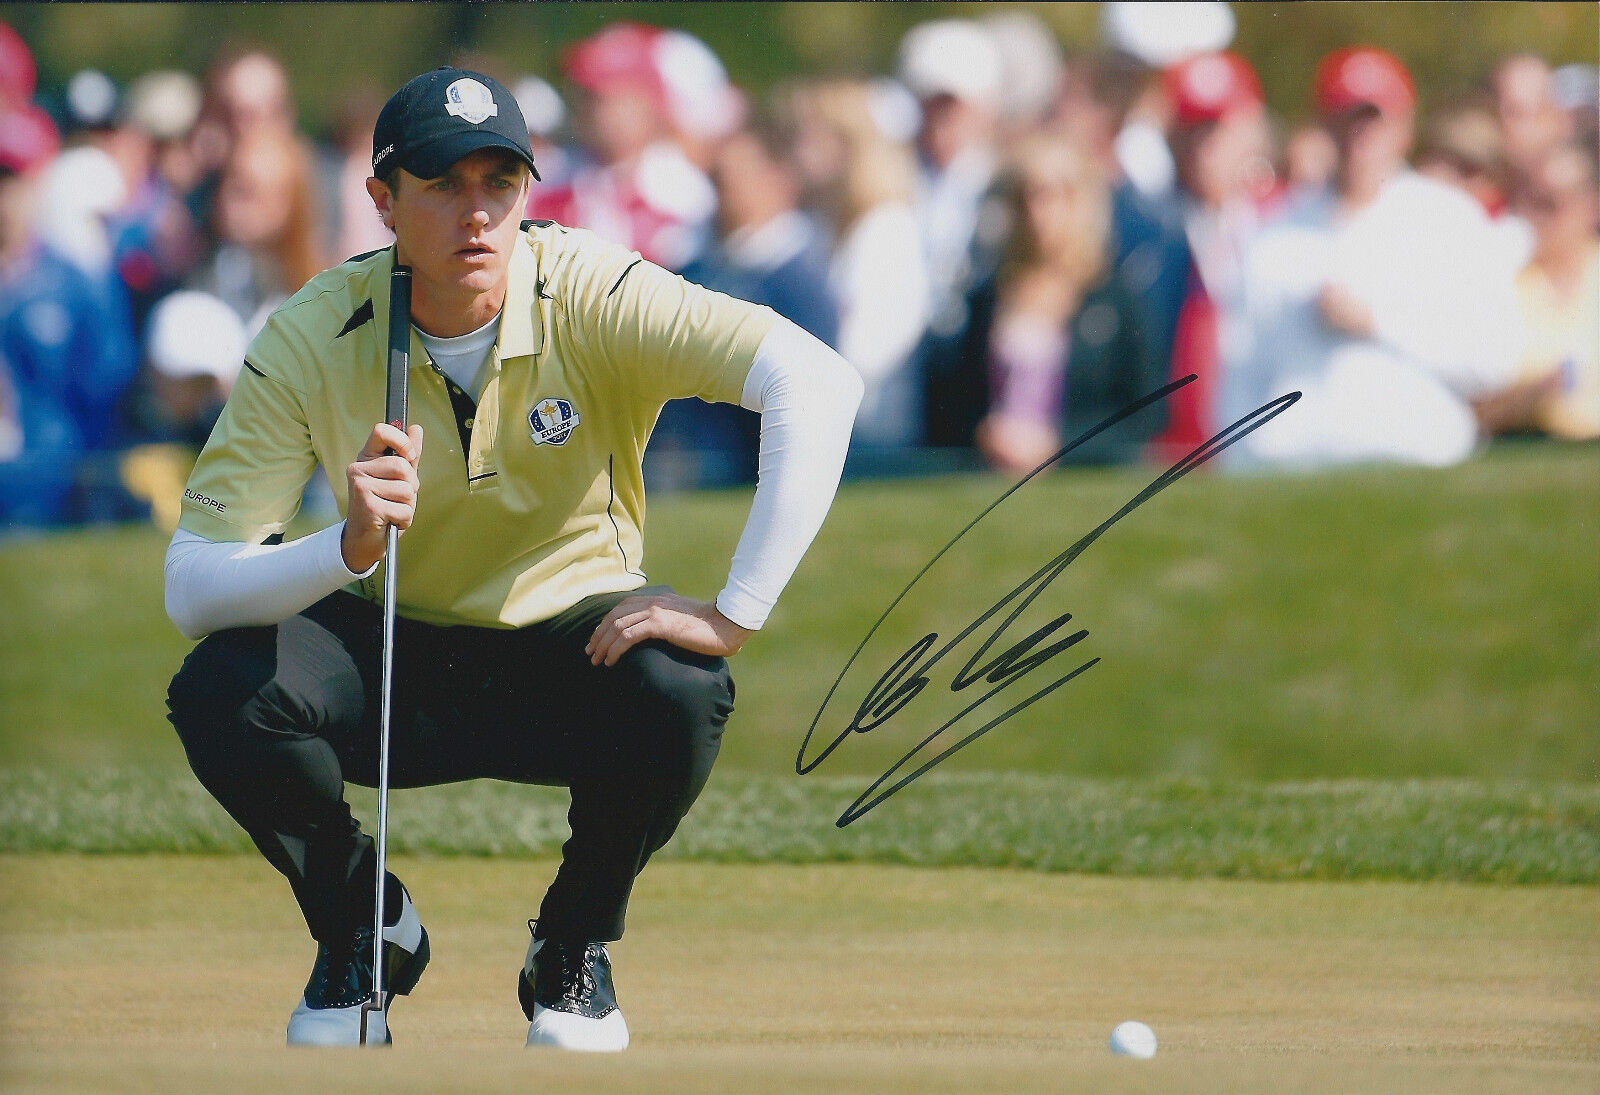 Nicolas COLSAERTS SIGNED Autograph 12x8 Photo Poster painting AFTAL COA Ryder Cup Team EUROPE